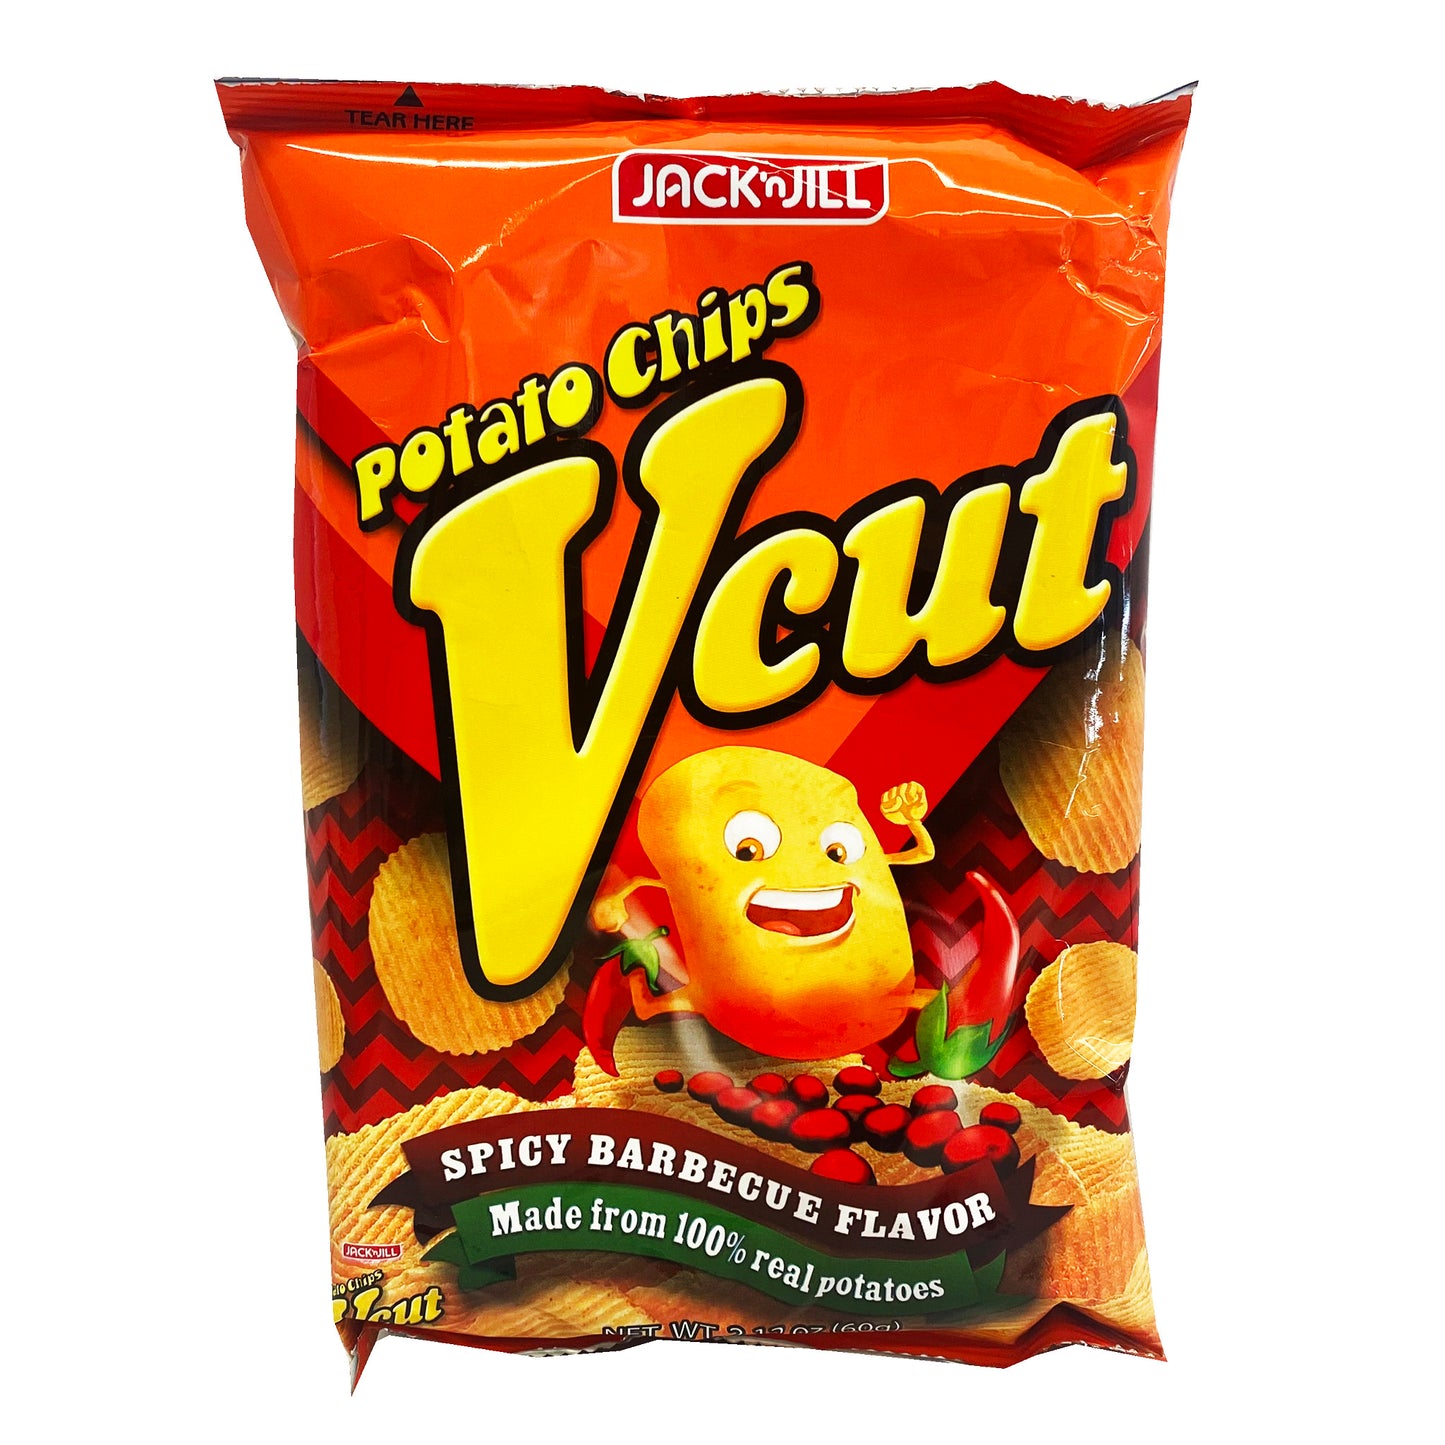 Front graphic image of Jack n' Jill Vcut Potato Chips - Spicy Barbecue 2.12oz